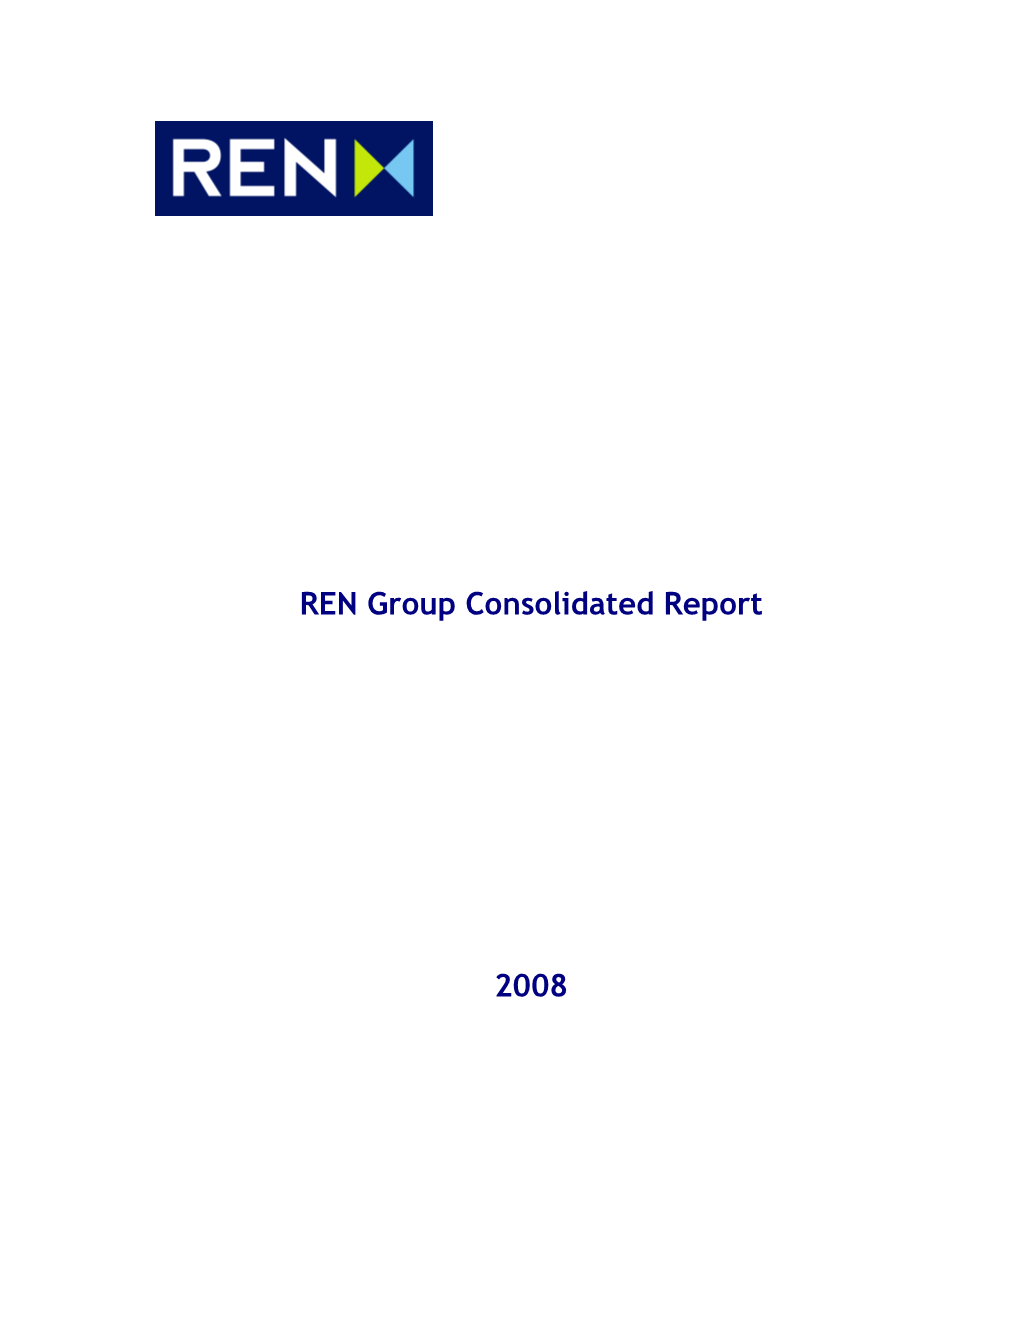 REN Group Consolidated Report 2008